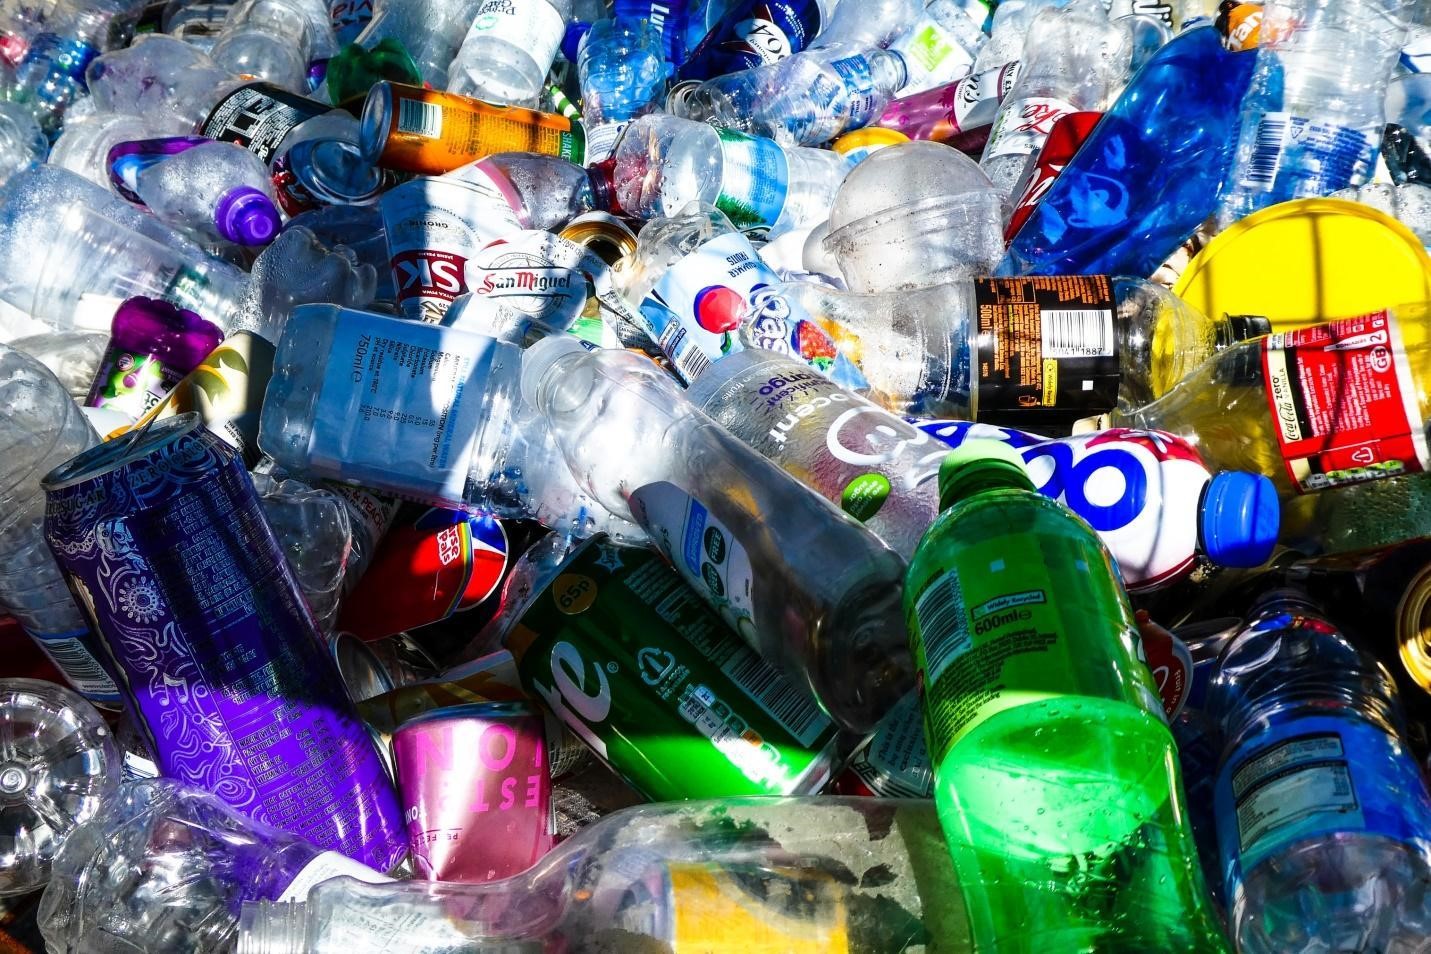 Plastic Pollution - Definition, Effects & How We Can Prevent It